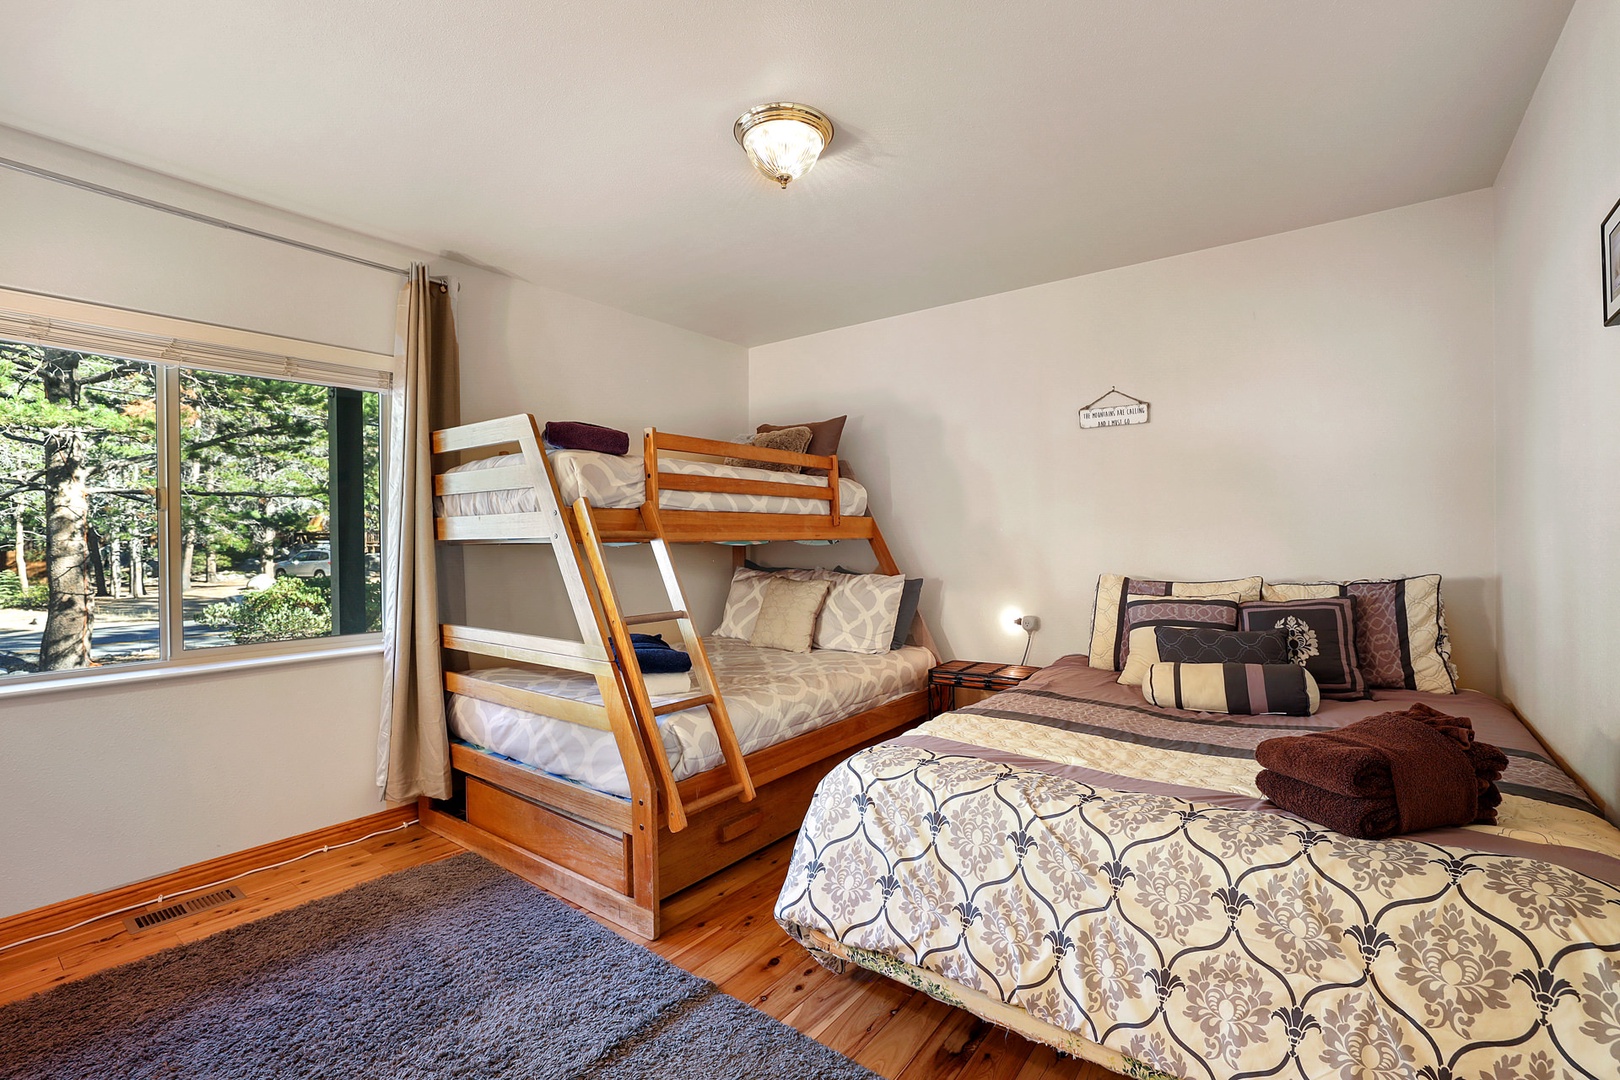 4th bedroom: Queen bed, Twin/Full bunkbed, trundle